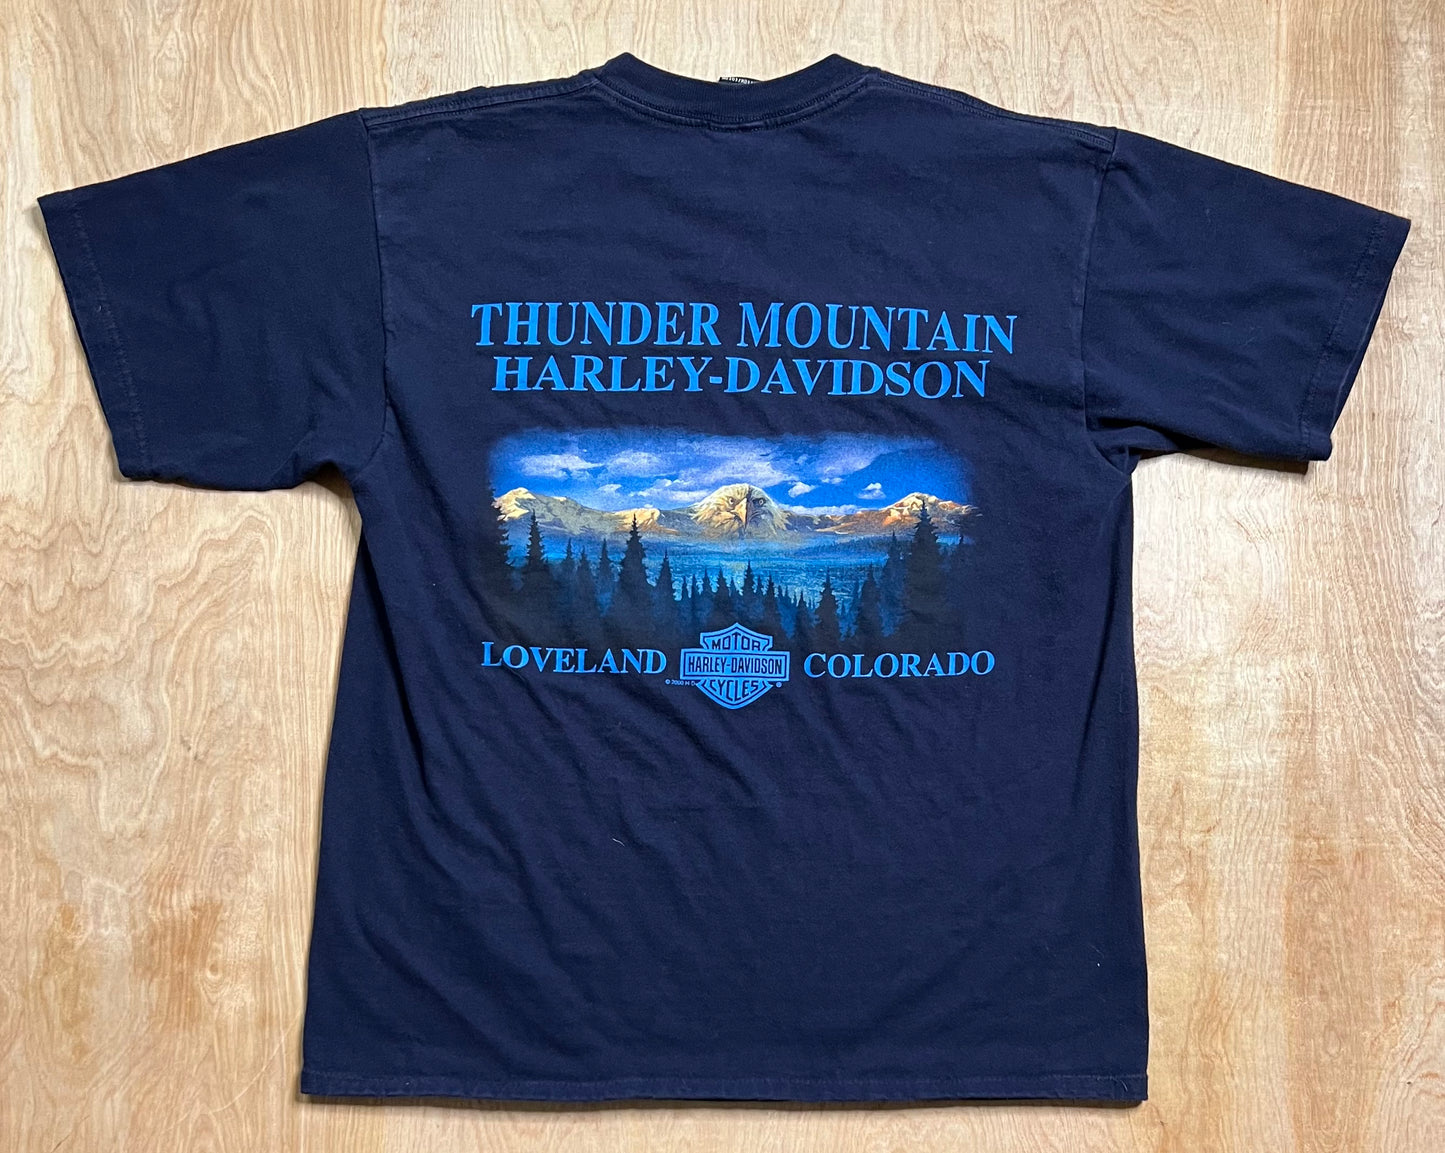 2003 Harley Davidson "Ride with the Wind" Loveland, Colorado T-Shirt